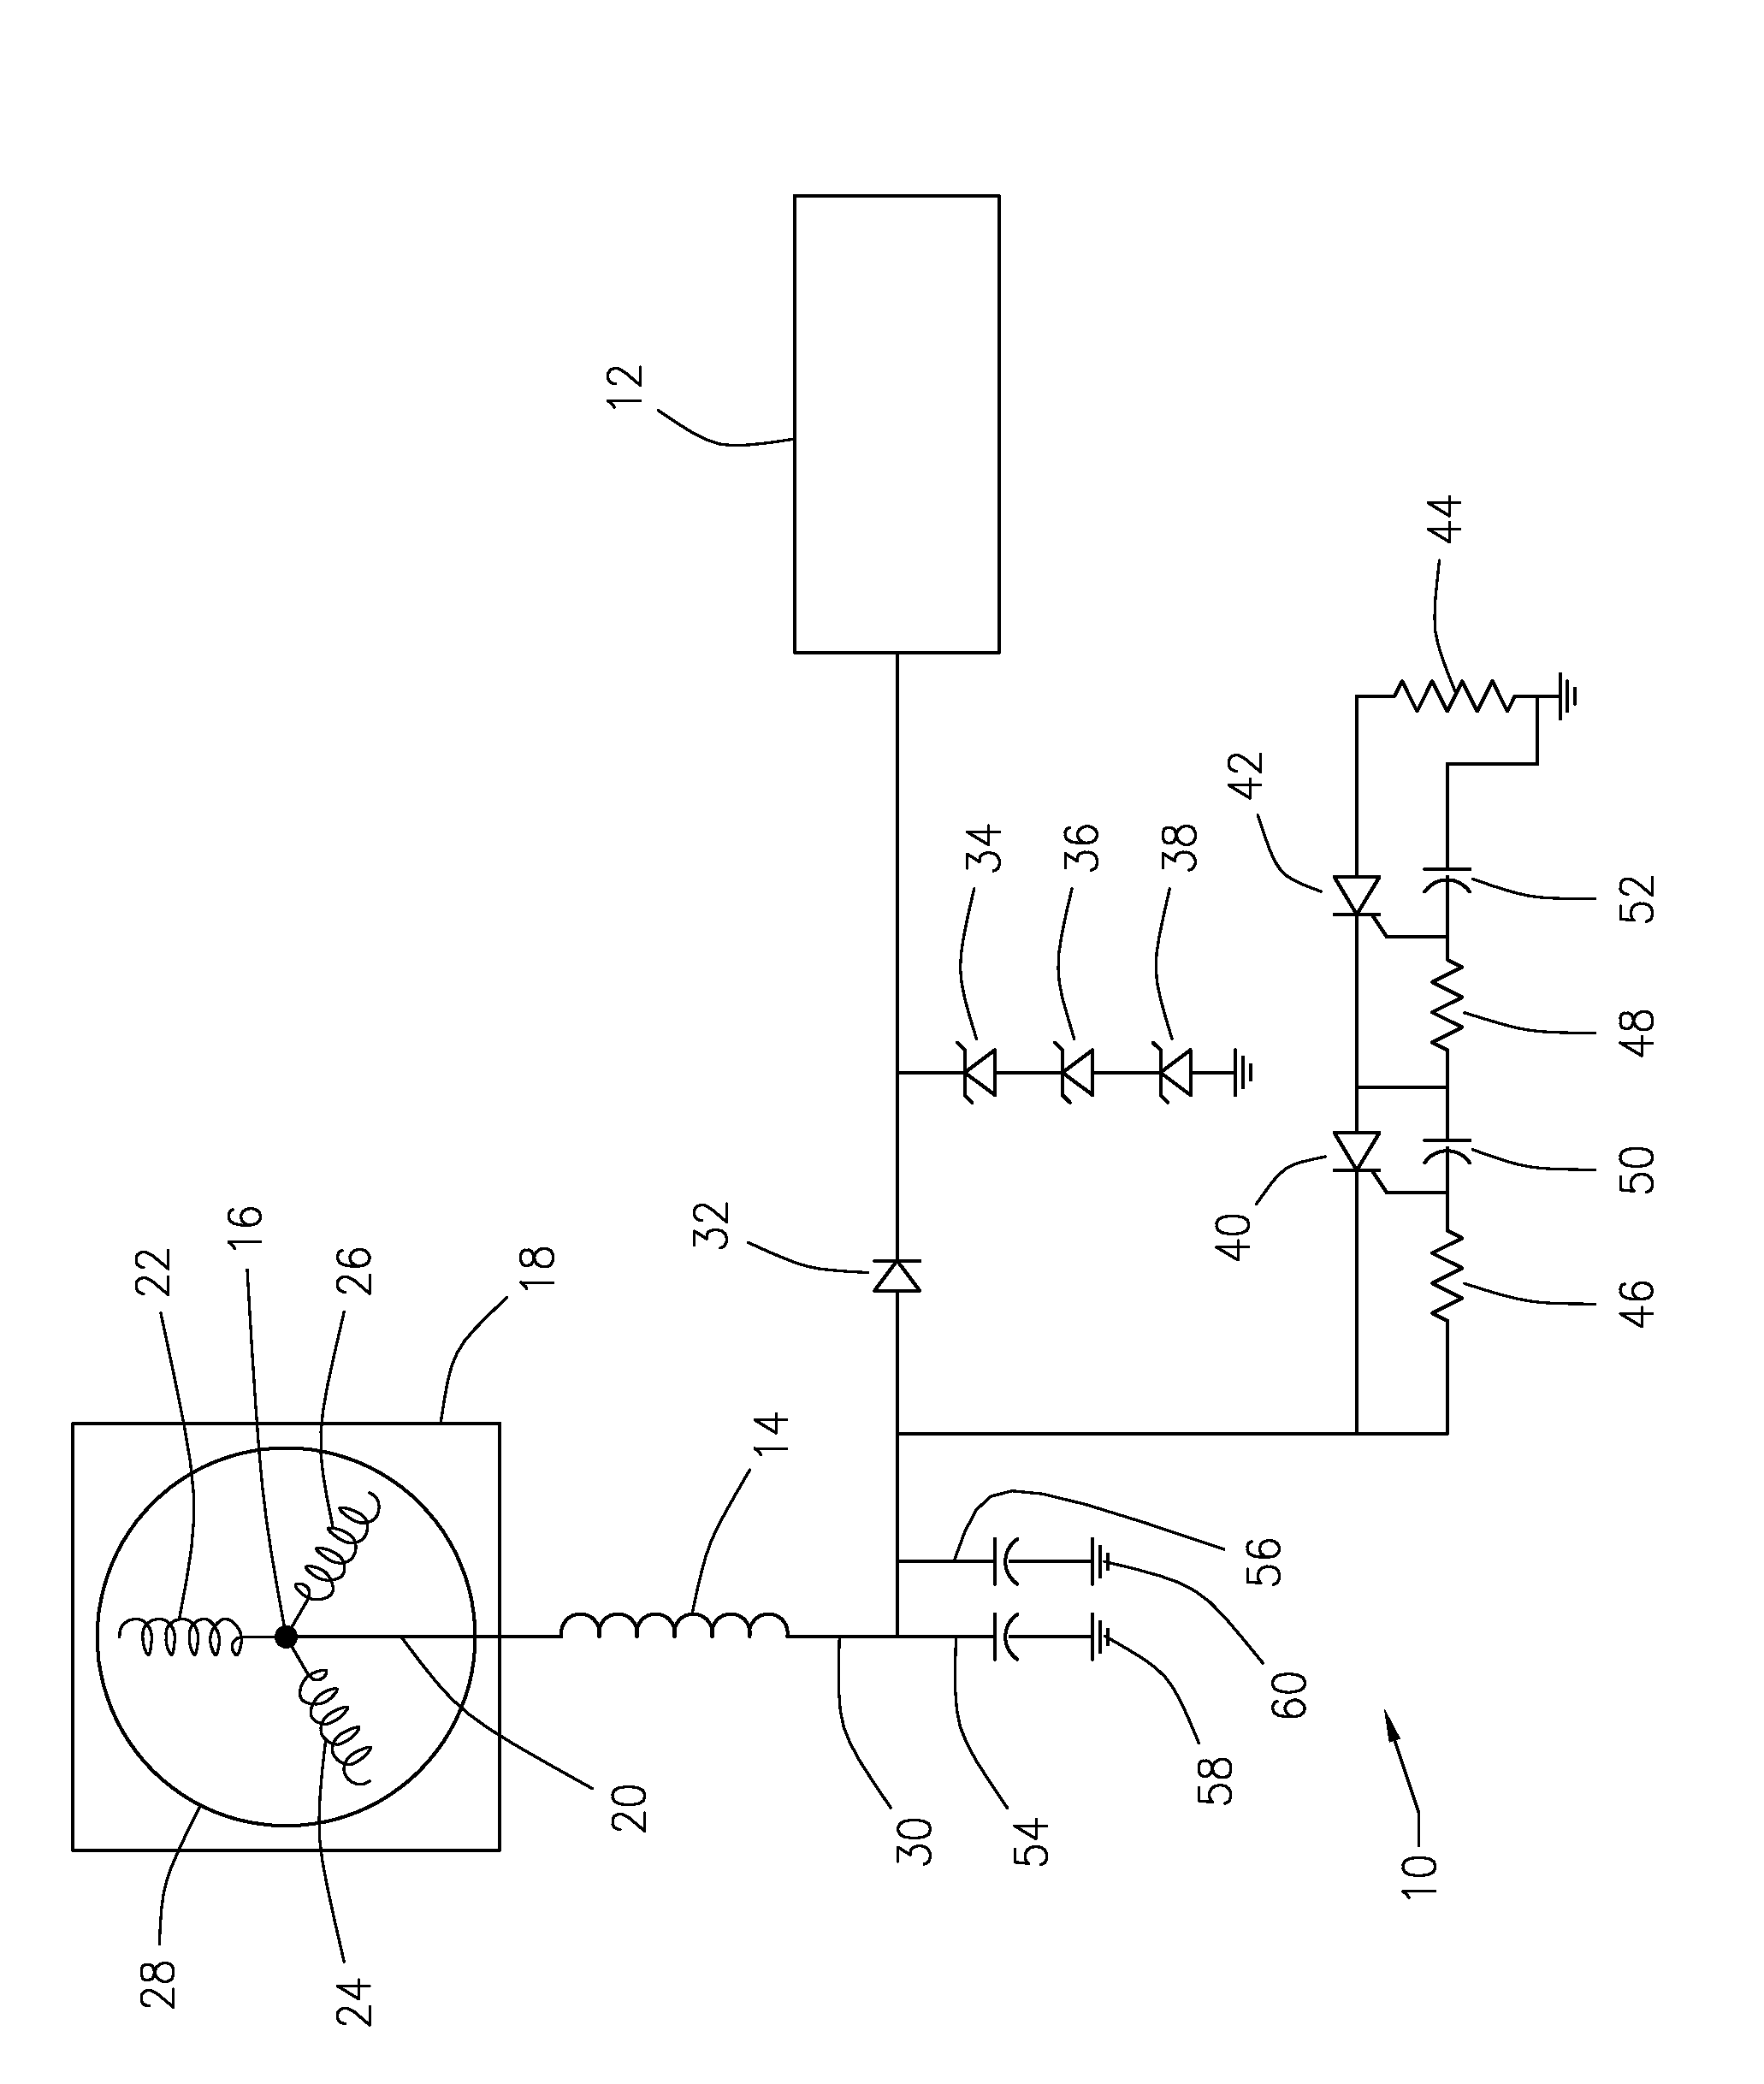 Downhole measurement tool circuit and method to balance fault current in a protective inductor